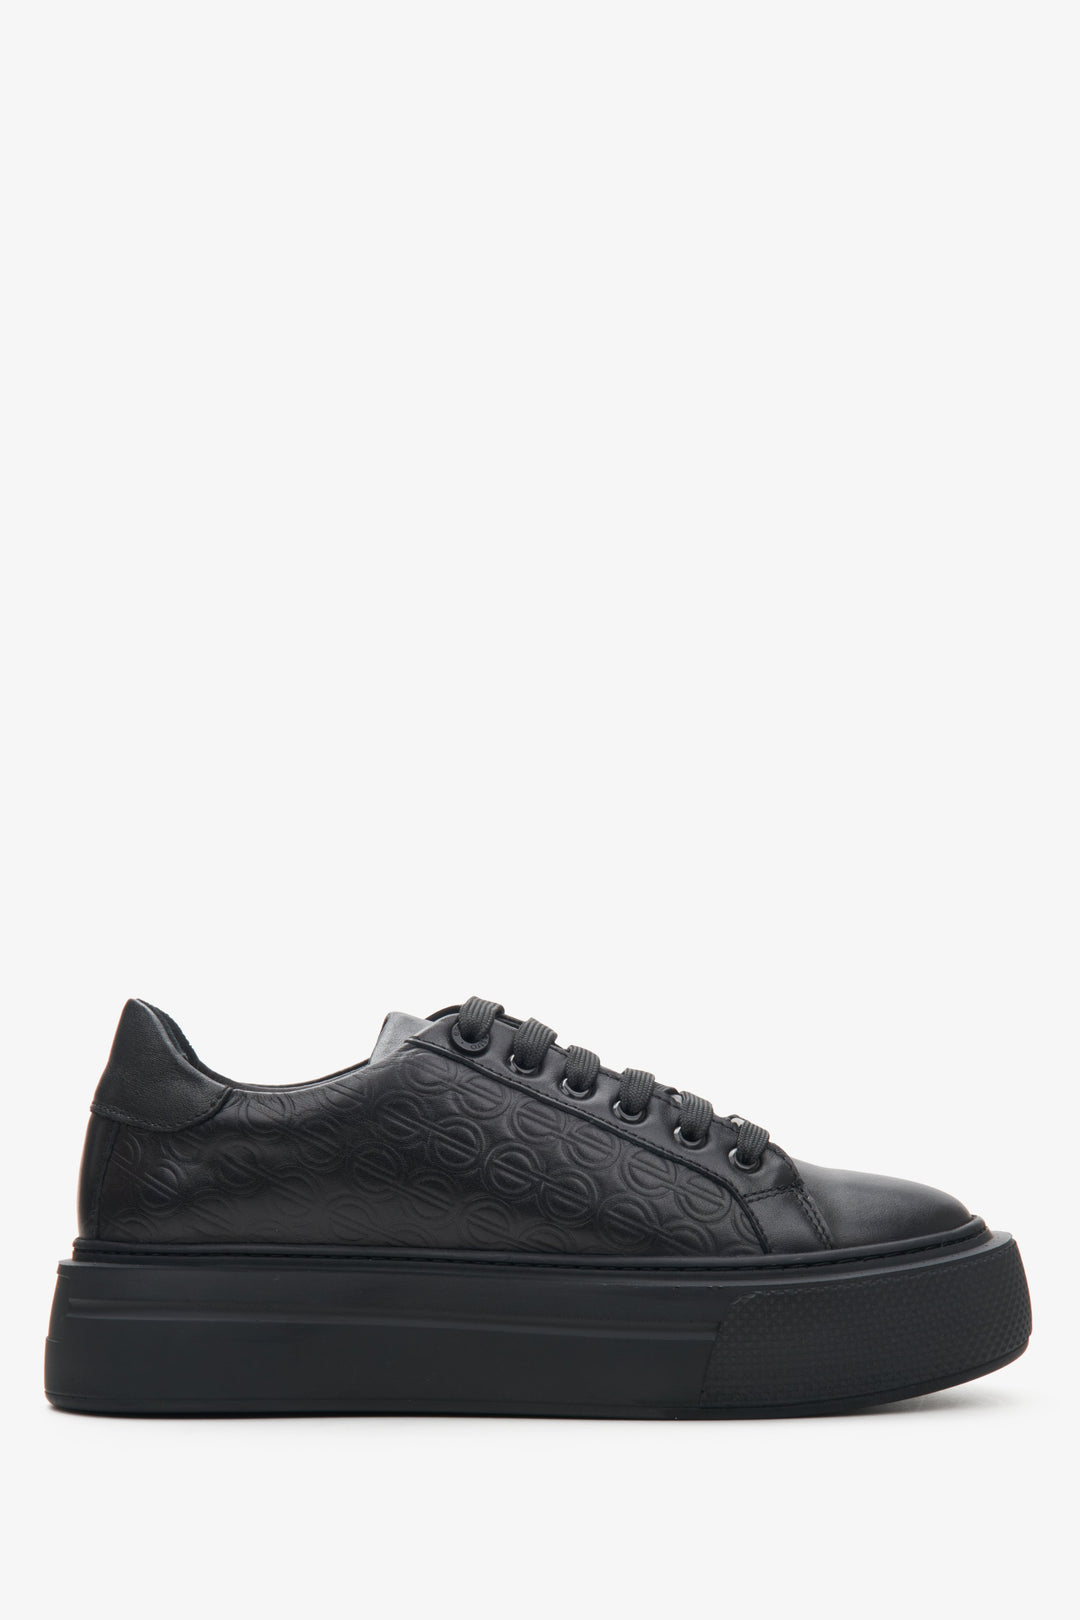 Women's Black Sneakers made of Genuine Leather with Thick Sole Estro ER00114395.